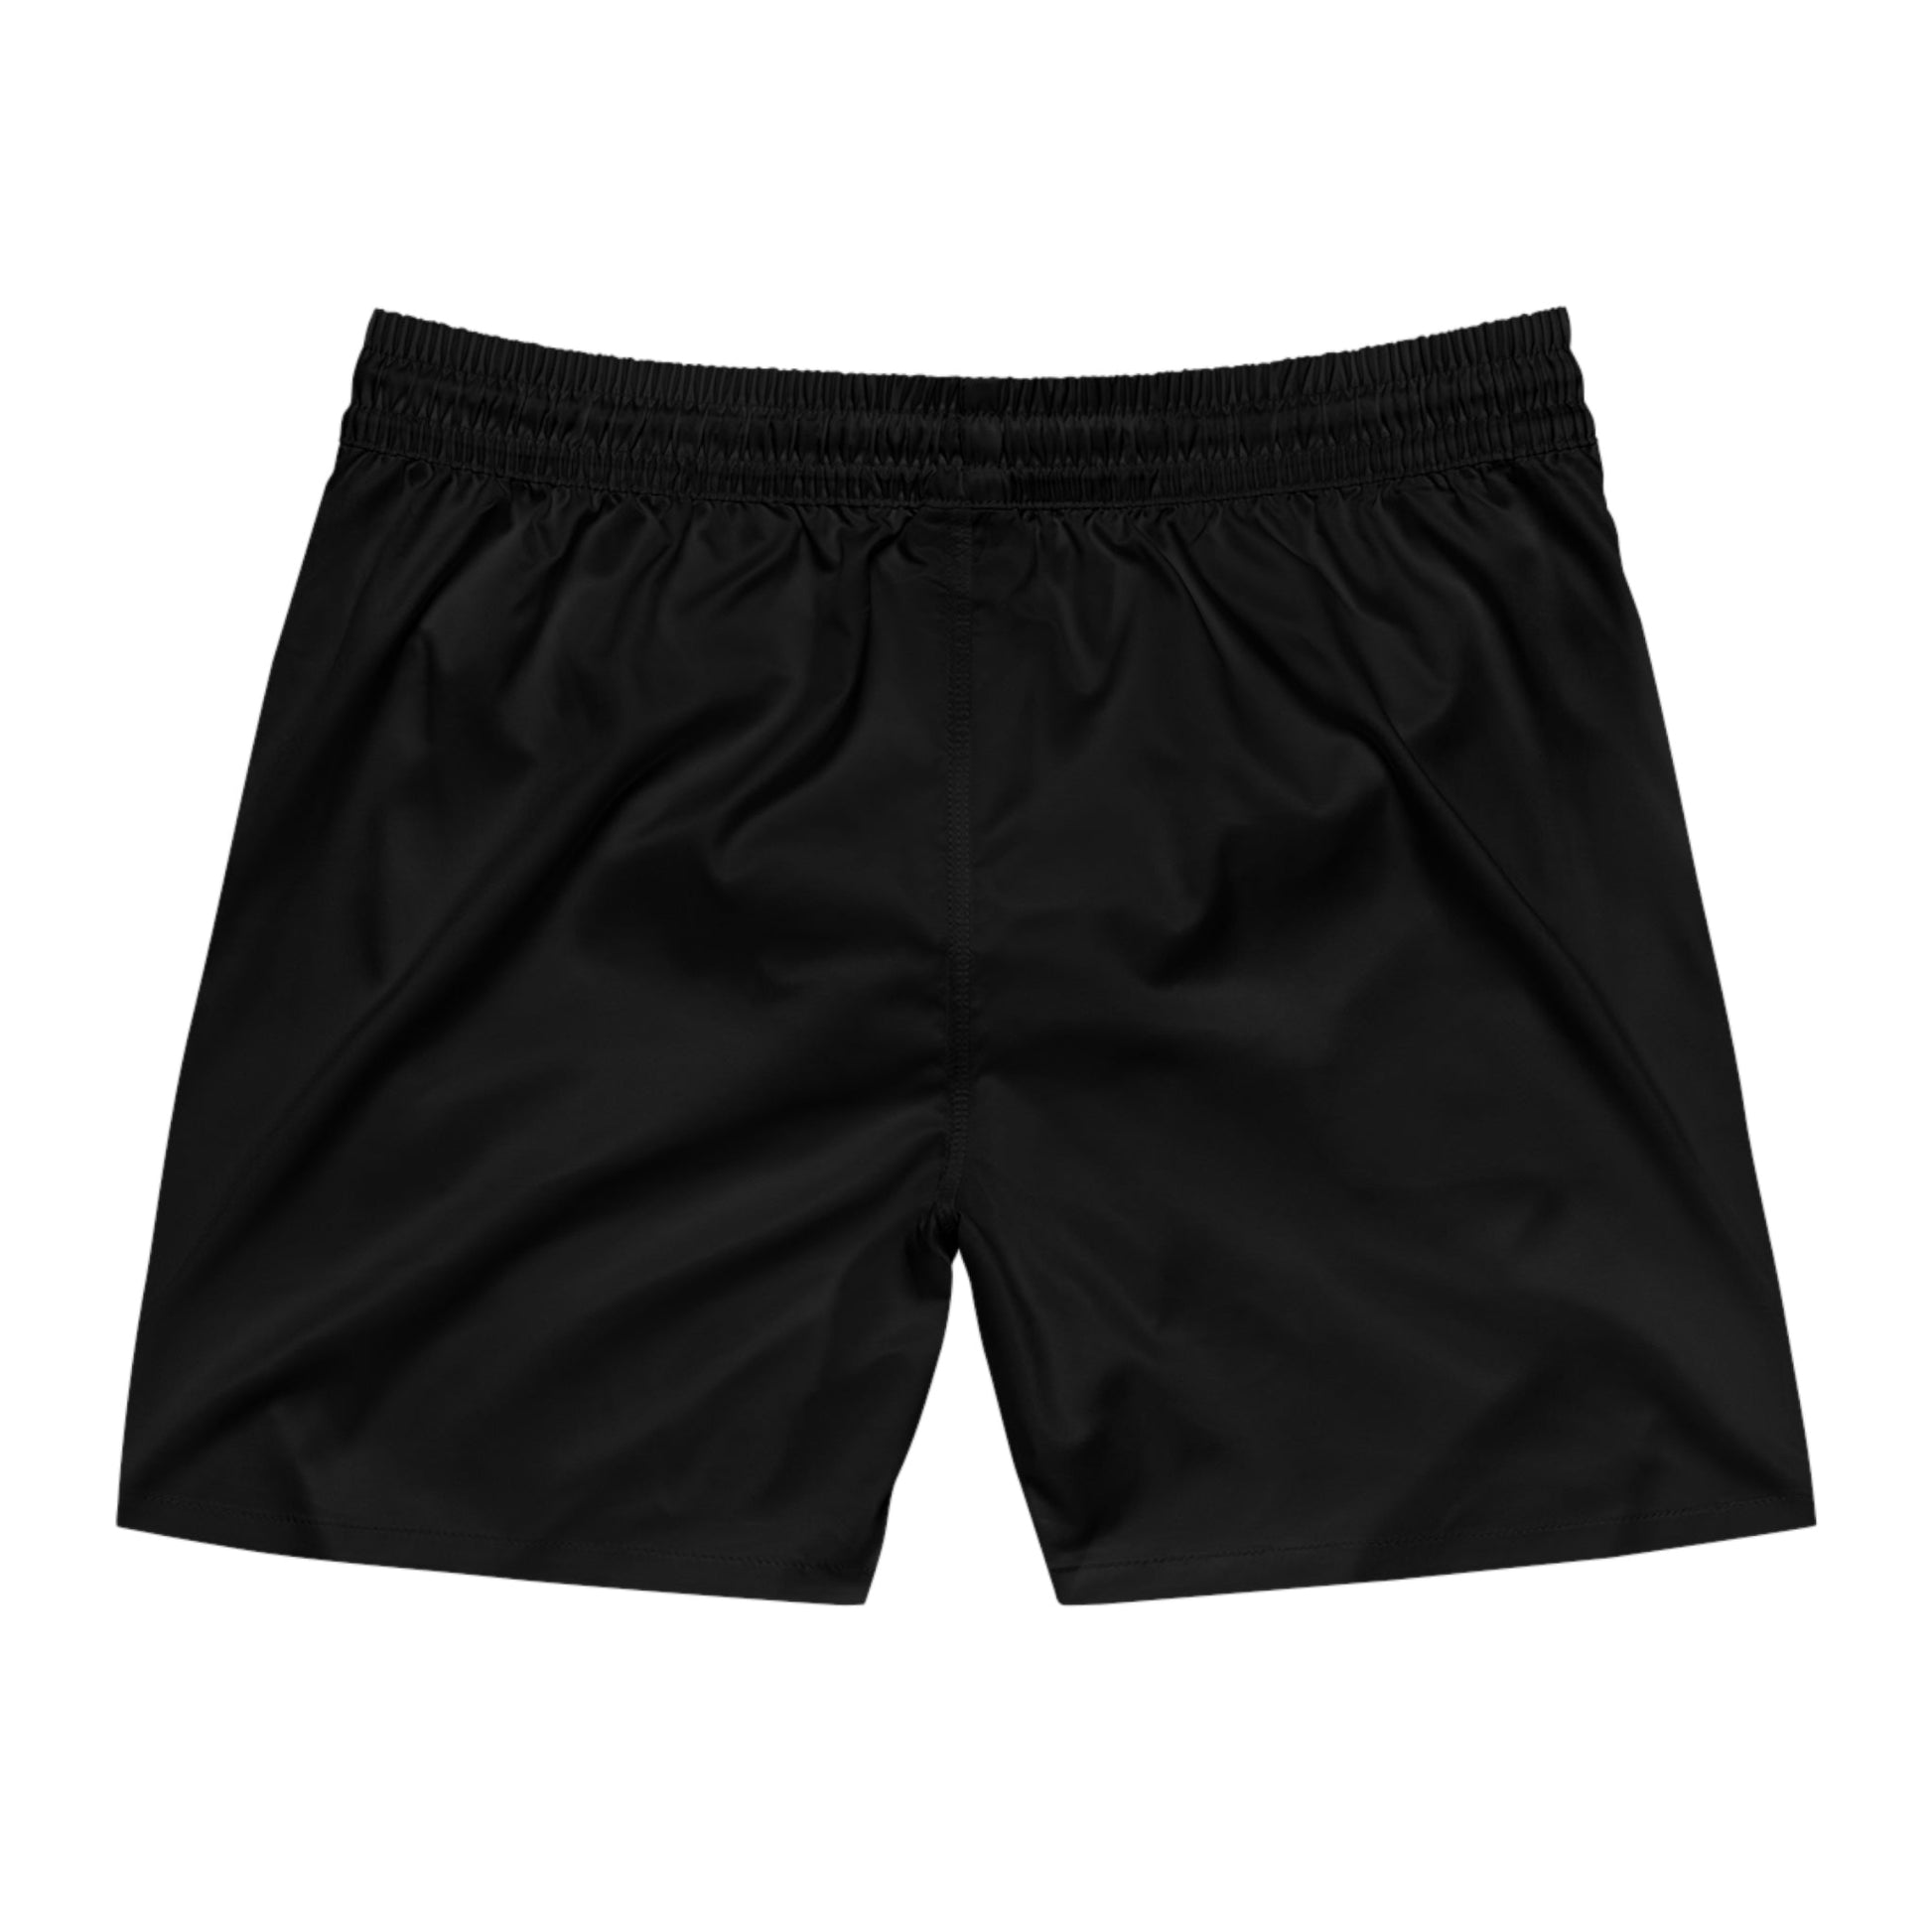 Men's Fit Mid-Length Swim Shorts - Selfcare on Sundays - Selfcare on Sundays